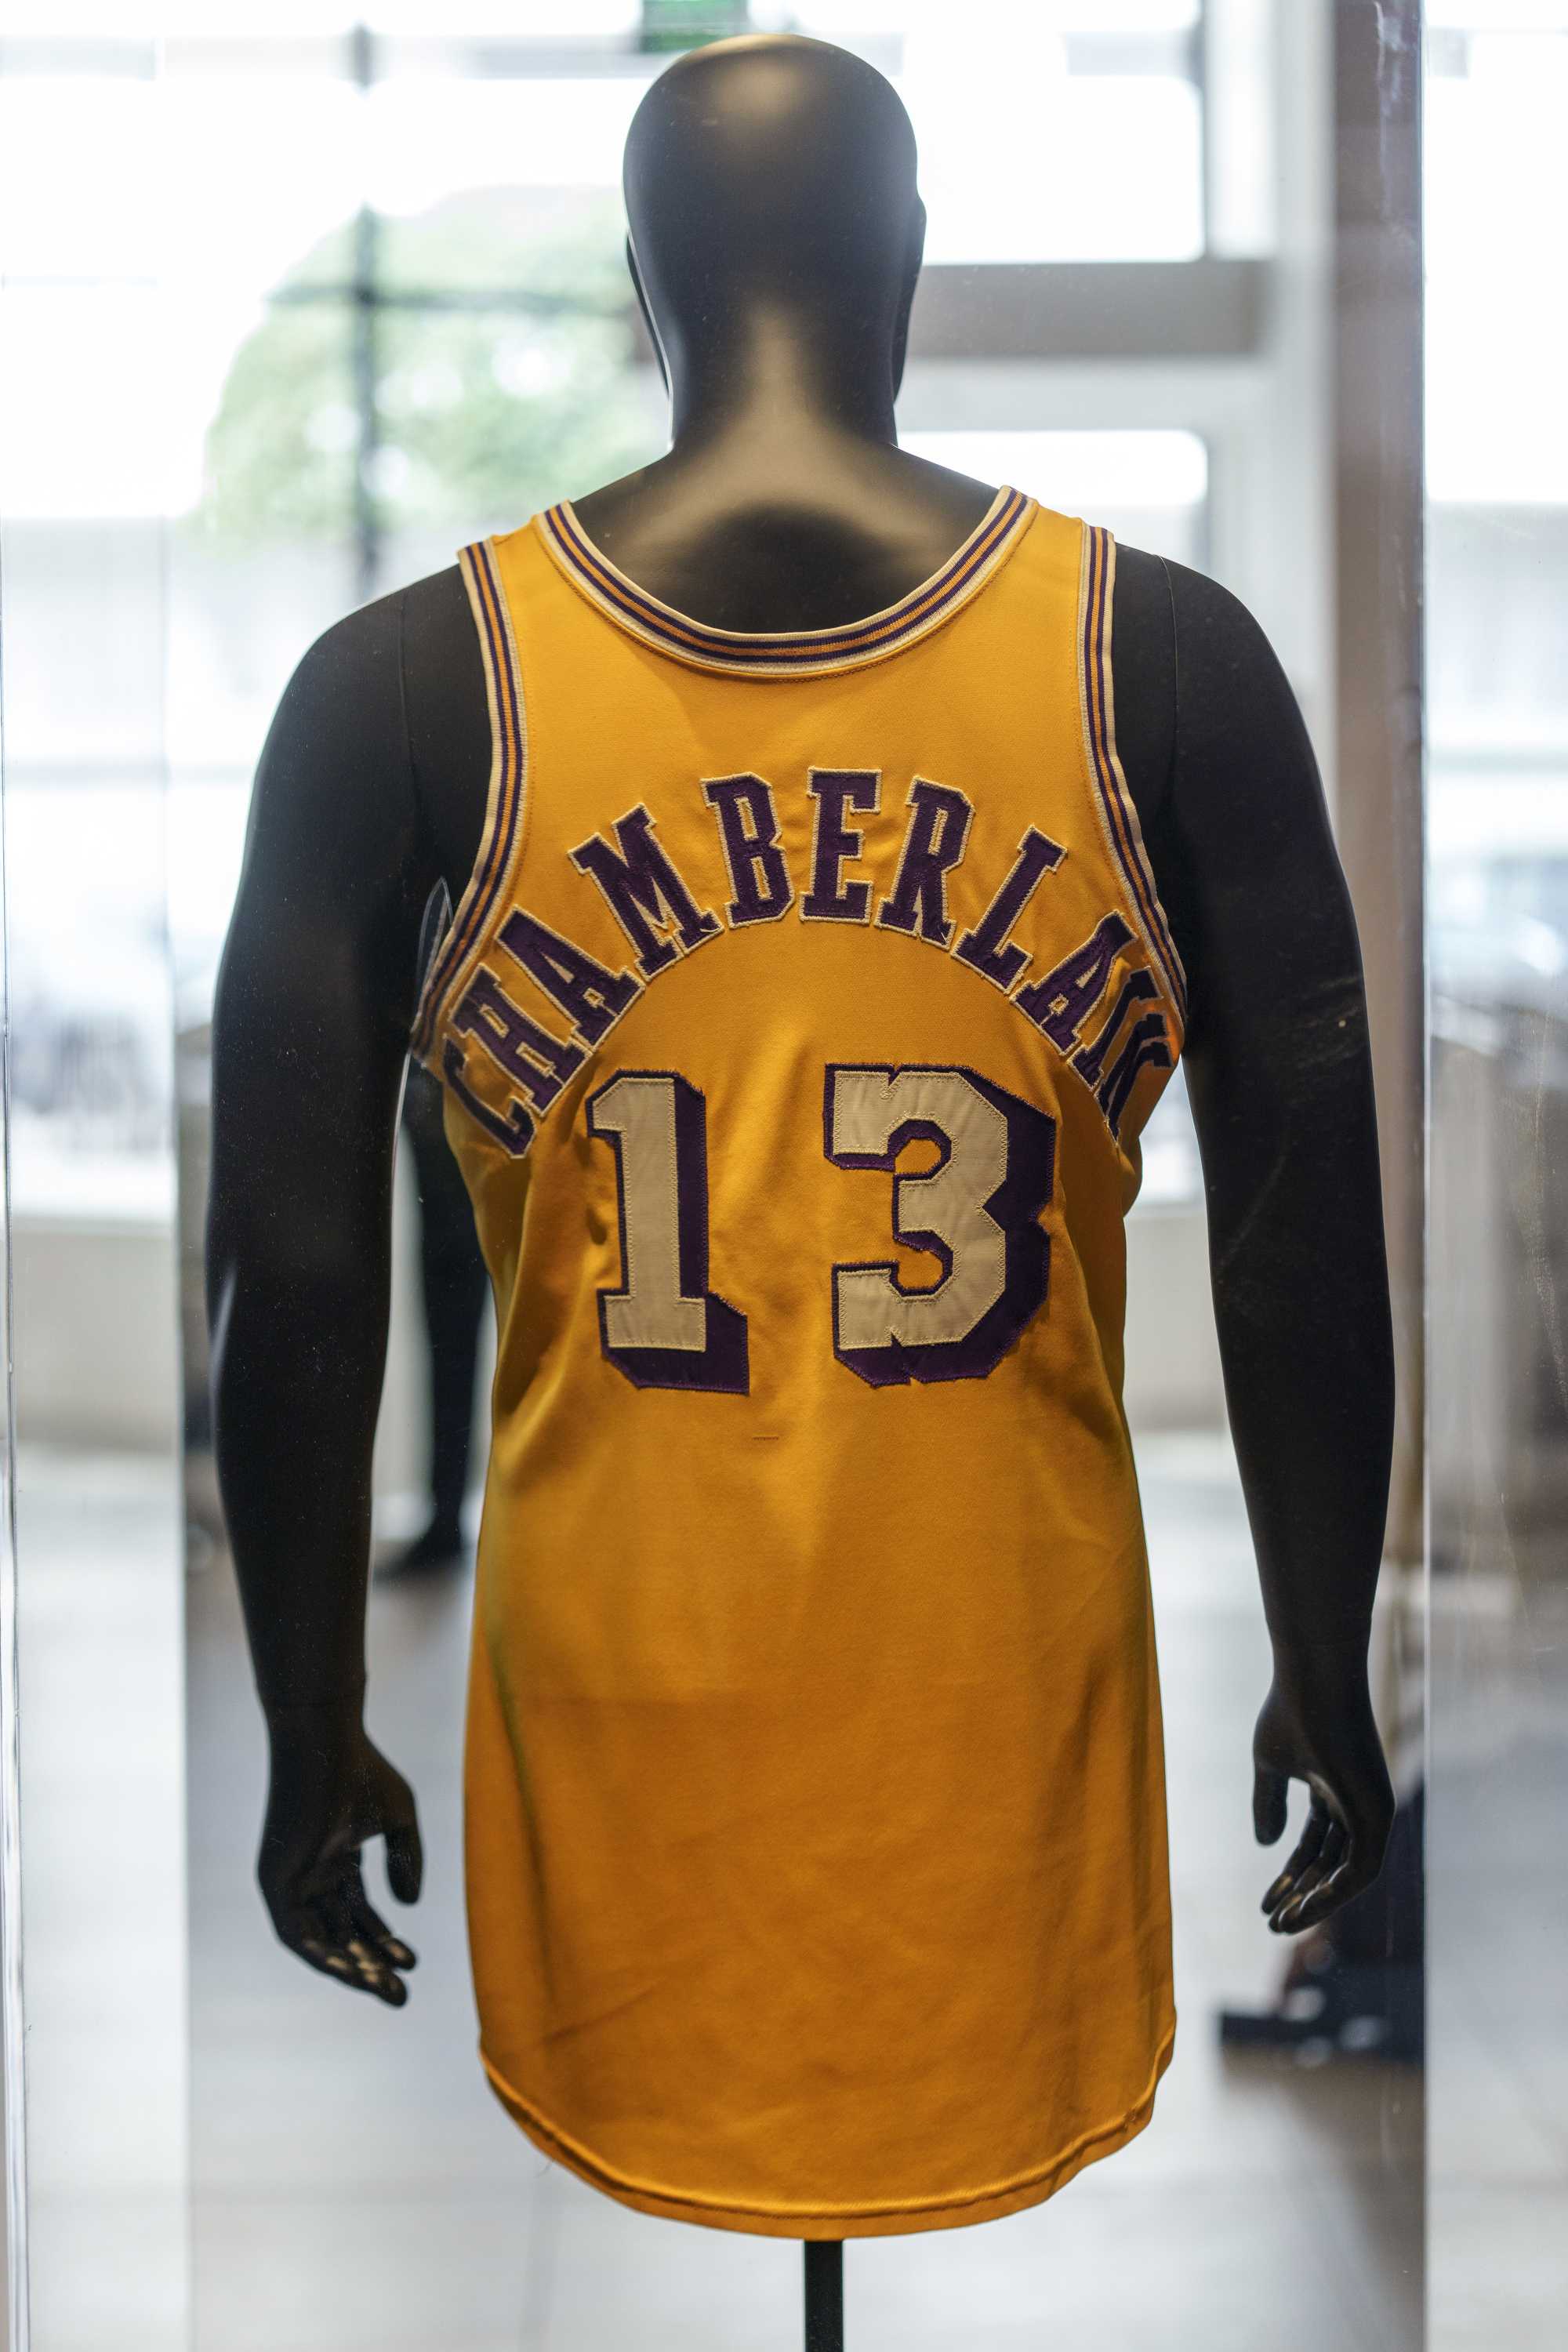 Michael Jordan 1998 NBA Finals jersey could go for $5 million at auction, Sports